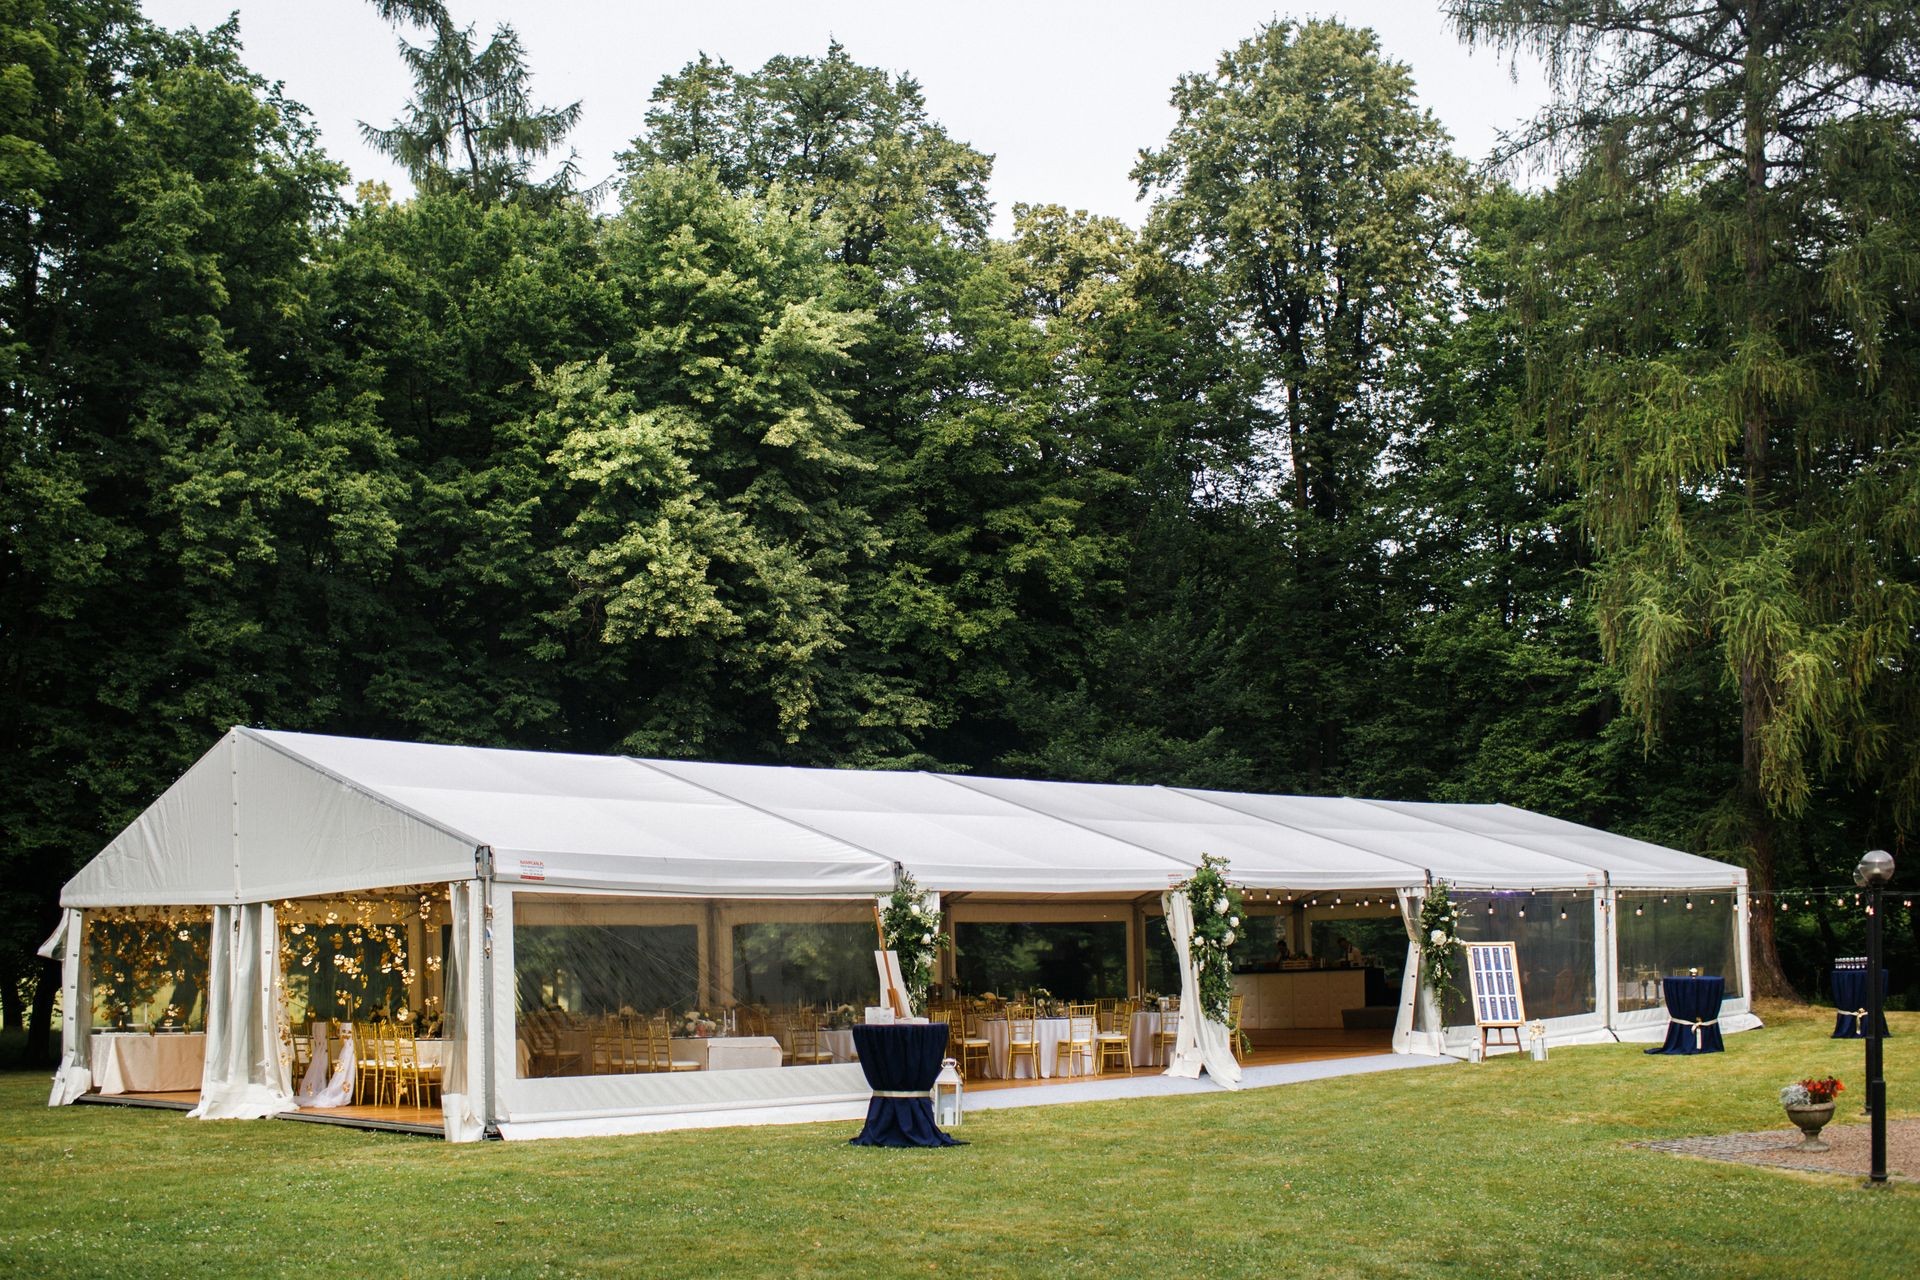 Mulch Medics budget-friendly color revival service enhances outdoor spaces for special occasions, from casual BBQs to grand weddings. Ideal for creating a stunning backdrop, our mulch dyeing service amplifies aesthetics for memorable events.